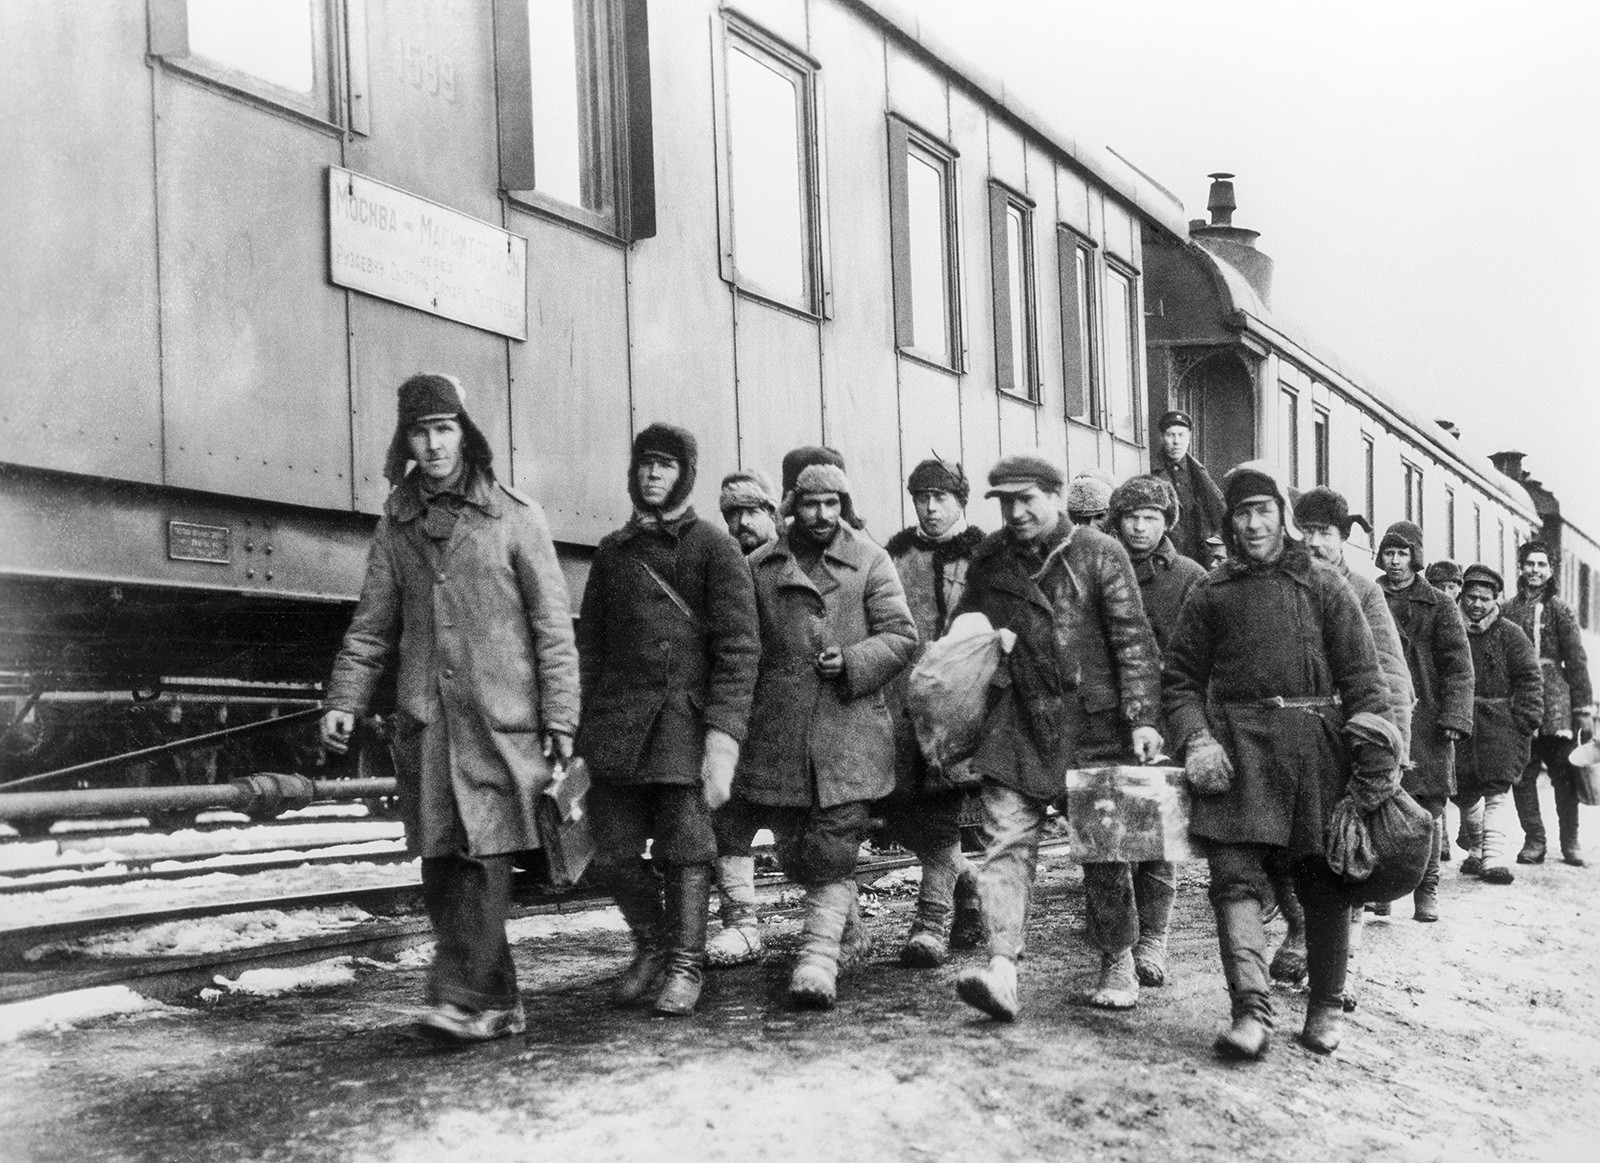 Soviet workers in the 1930s